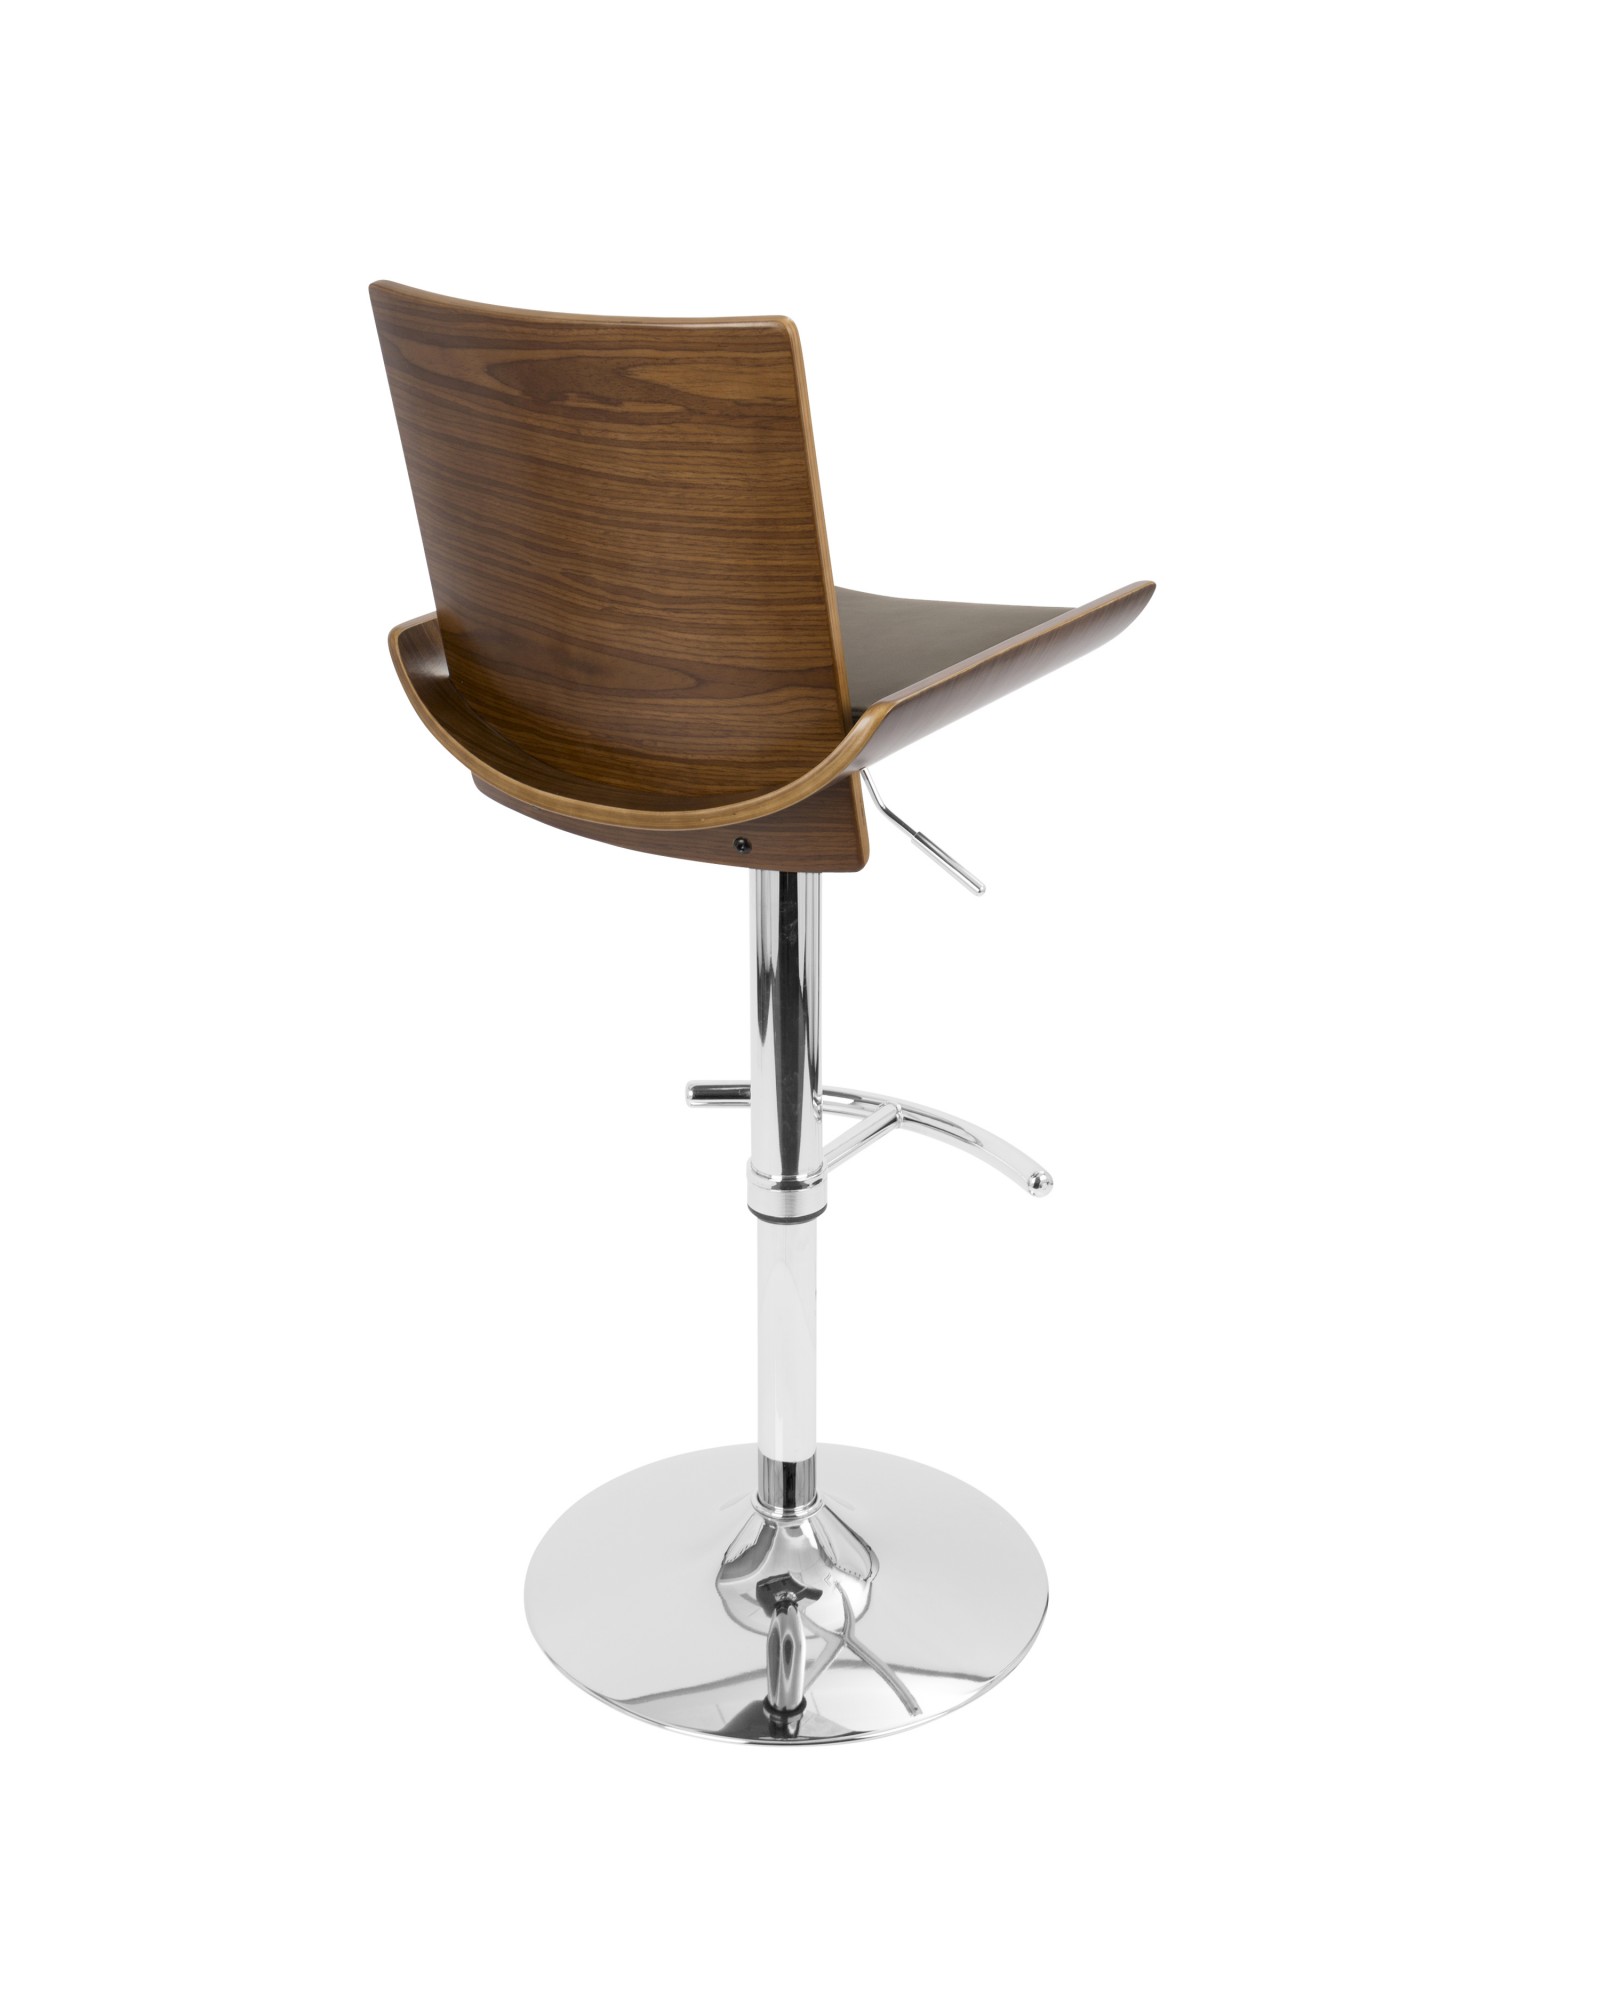 Vittorio Mid-Century Modern Adjustable Barstool with Swivel in Walnut and Brown Faux Leather